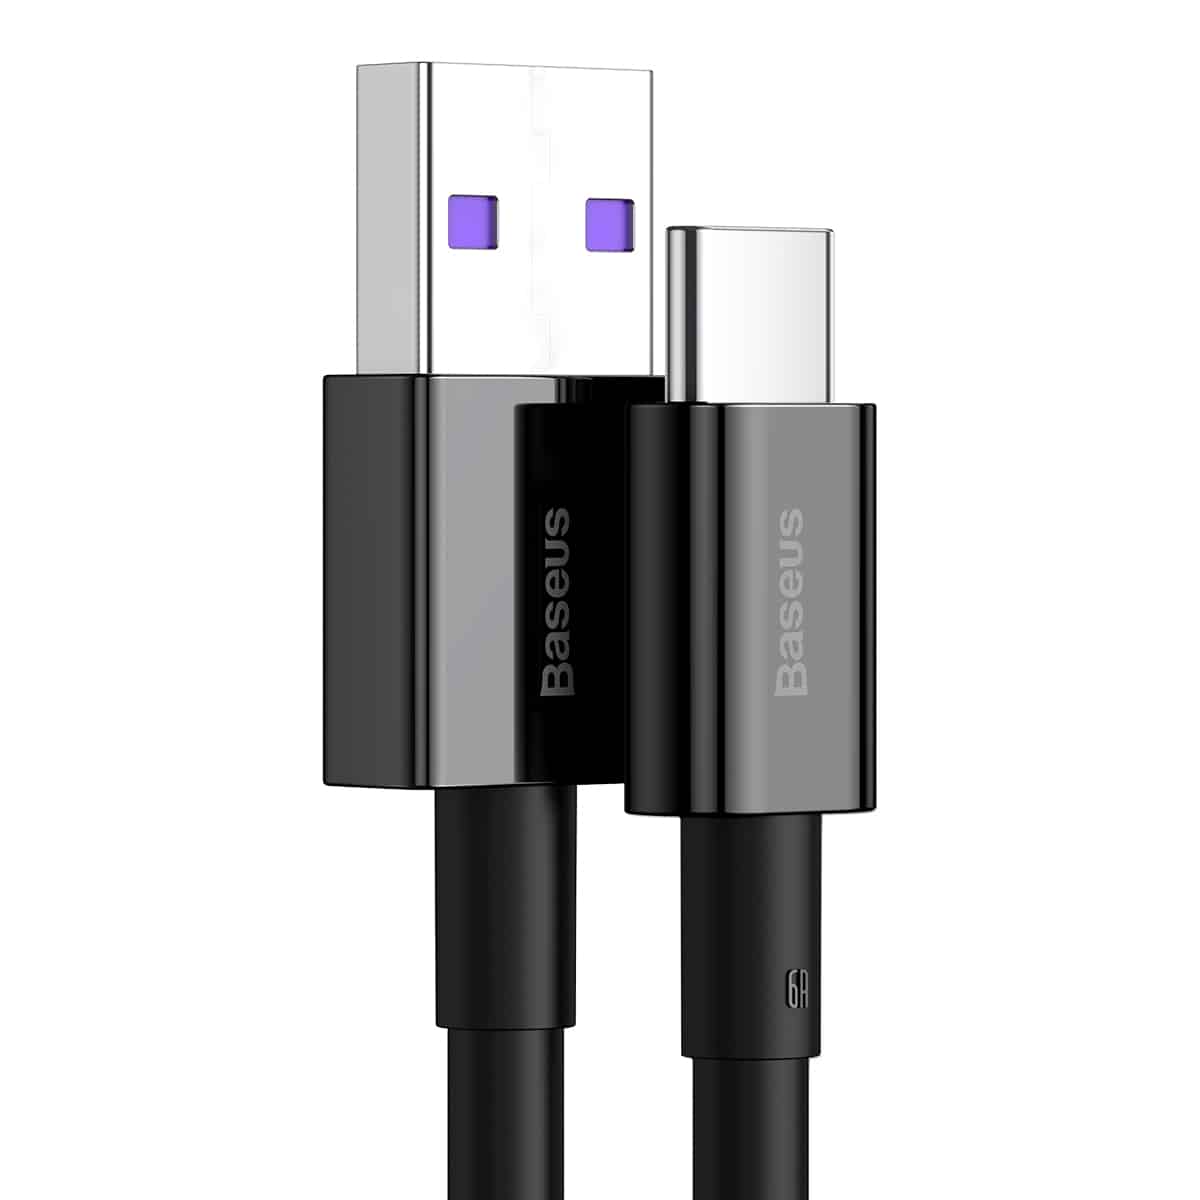 Baseus Superior Series Fast Charging Data Cable USB to Type-C 66W